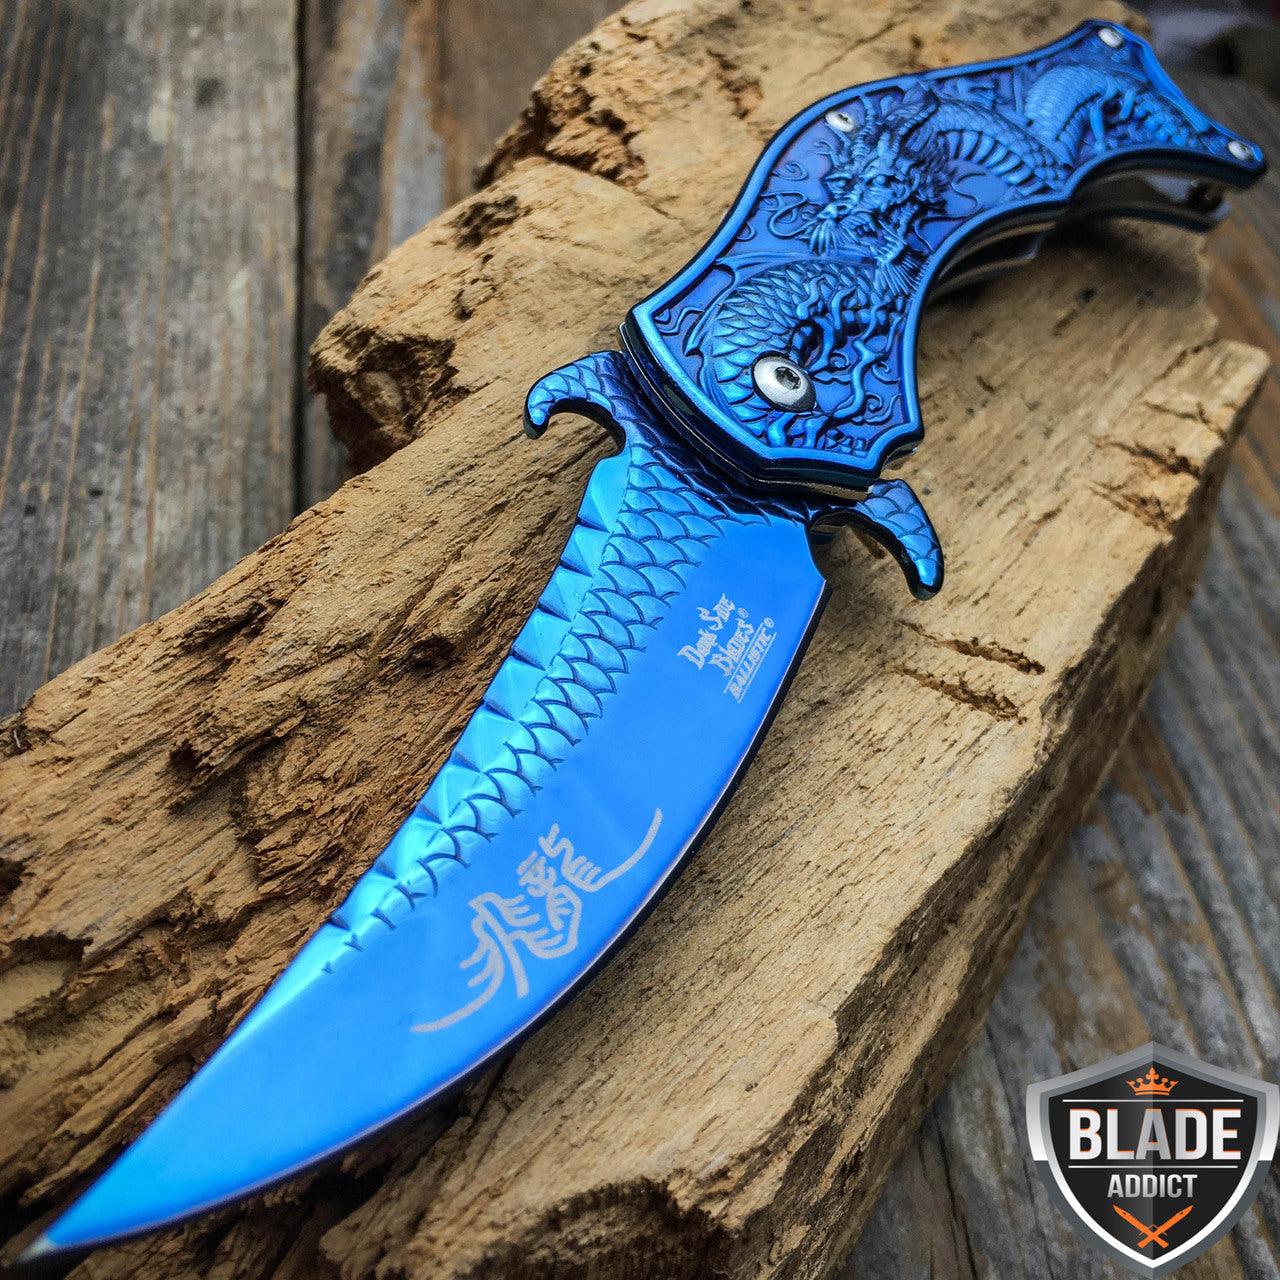 Cool Pocket Knives For Sale - Page 2 | BLADE ADDICT